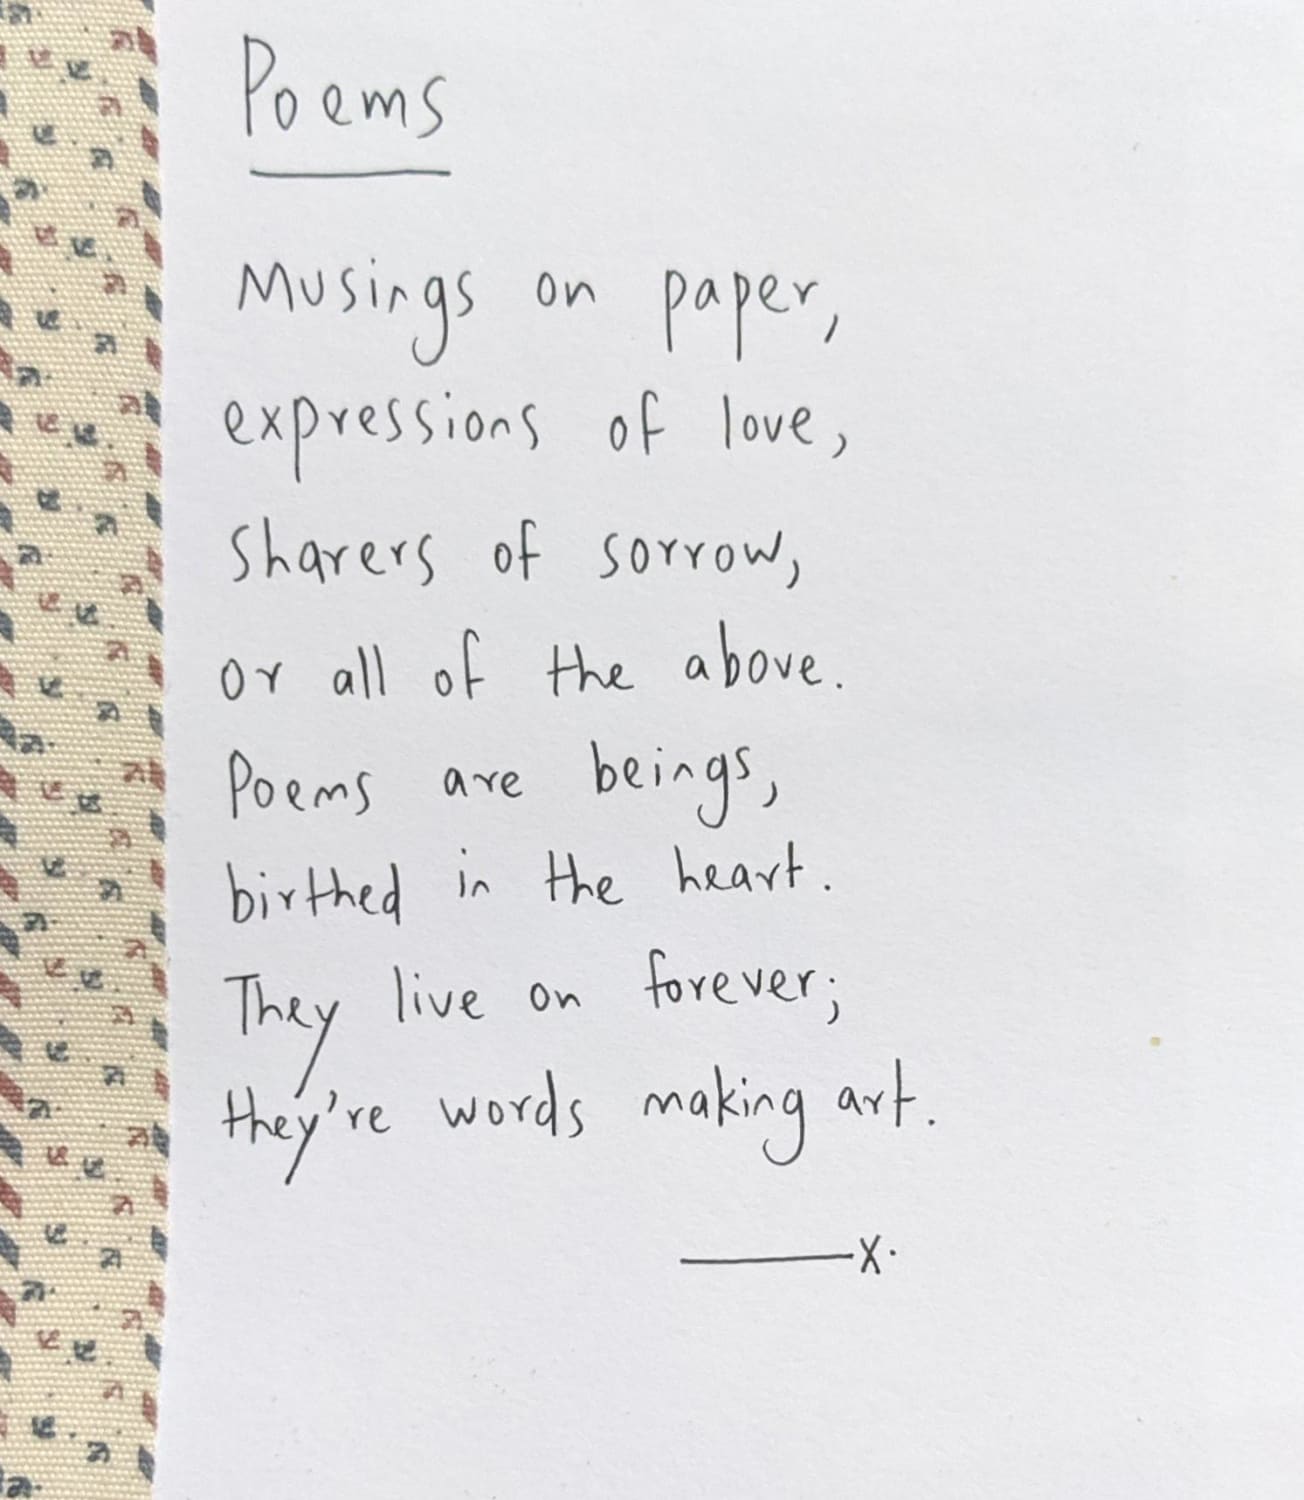 A poem on poems, in my writing